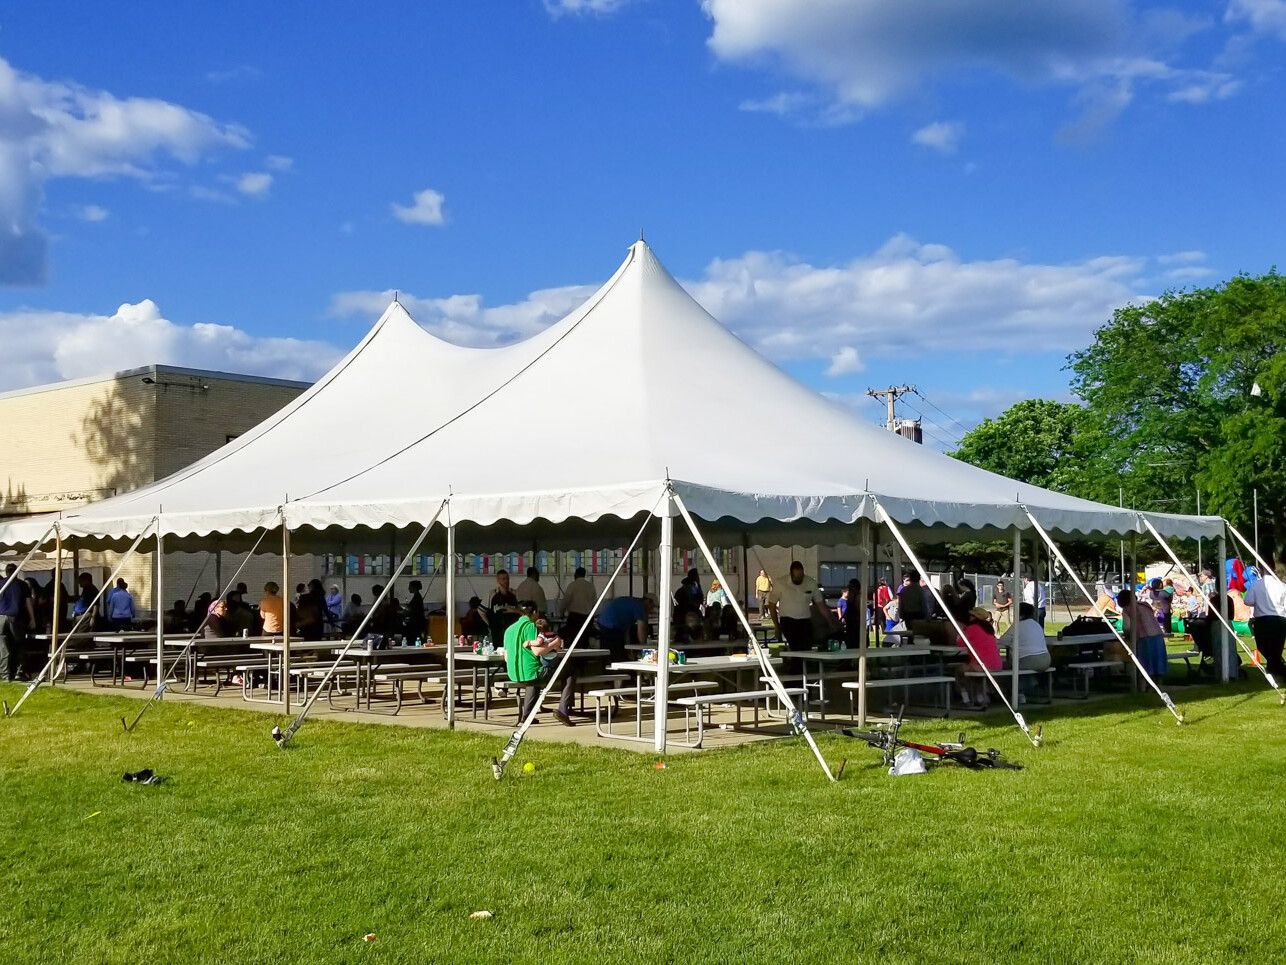 A high peak tent with picnic tables and people under it eating at a church picnic event.